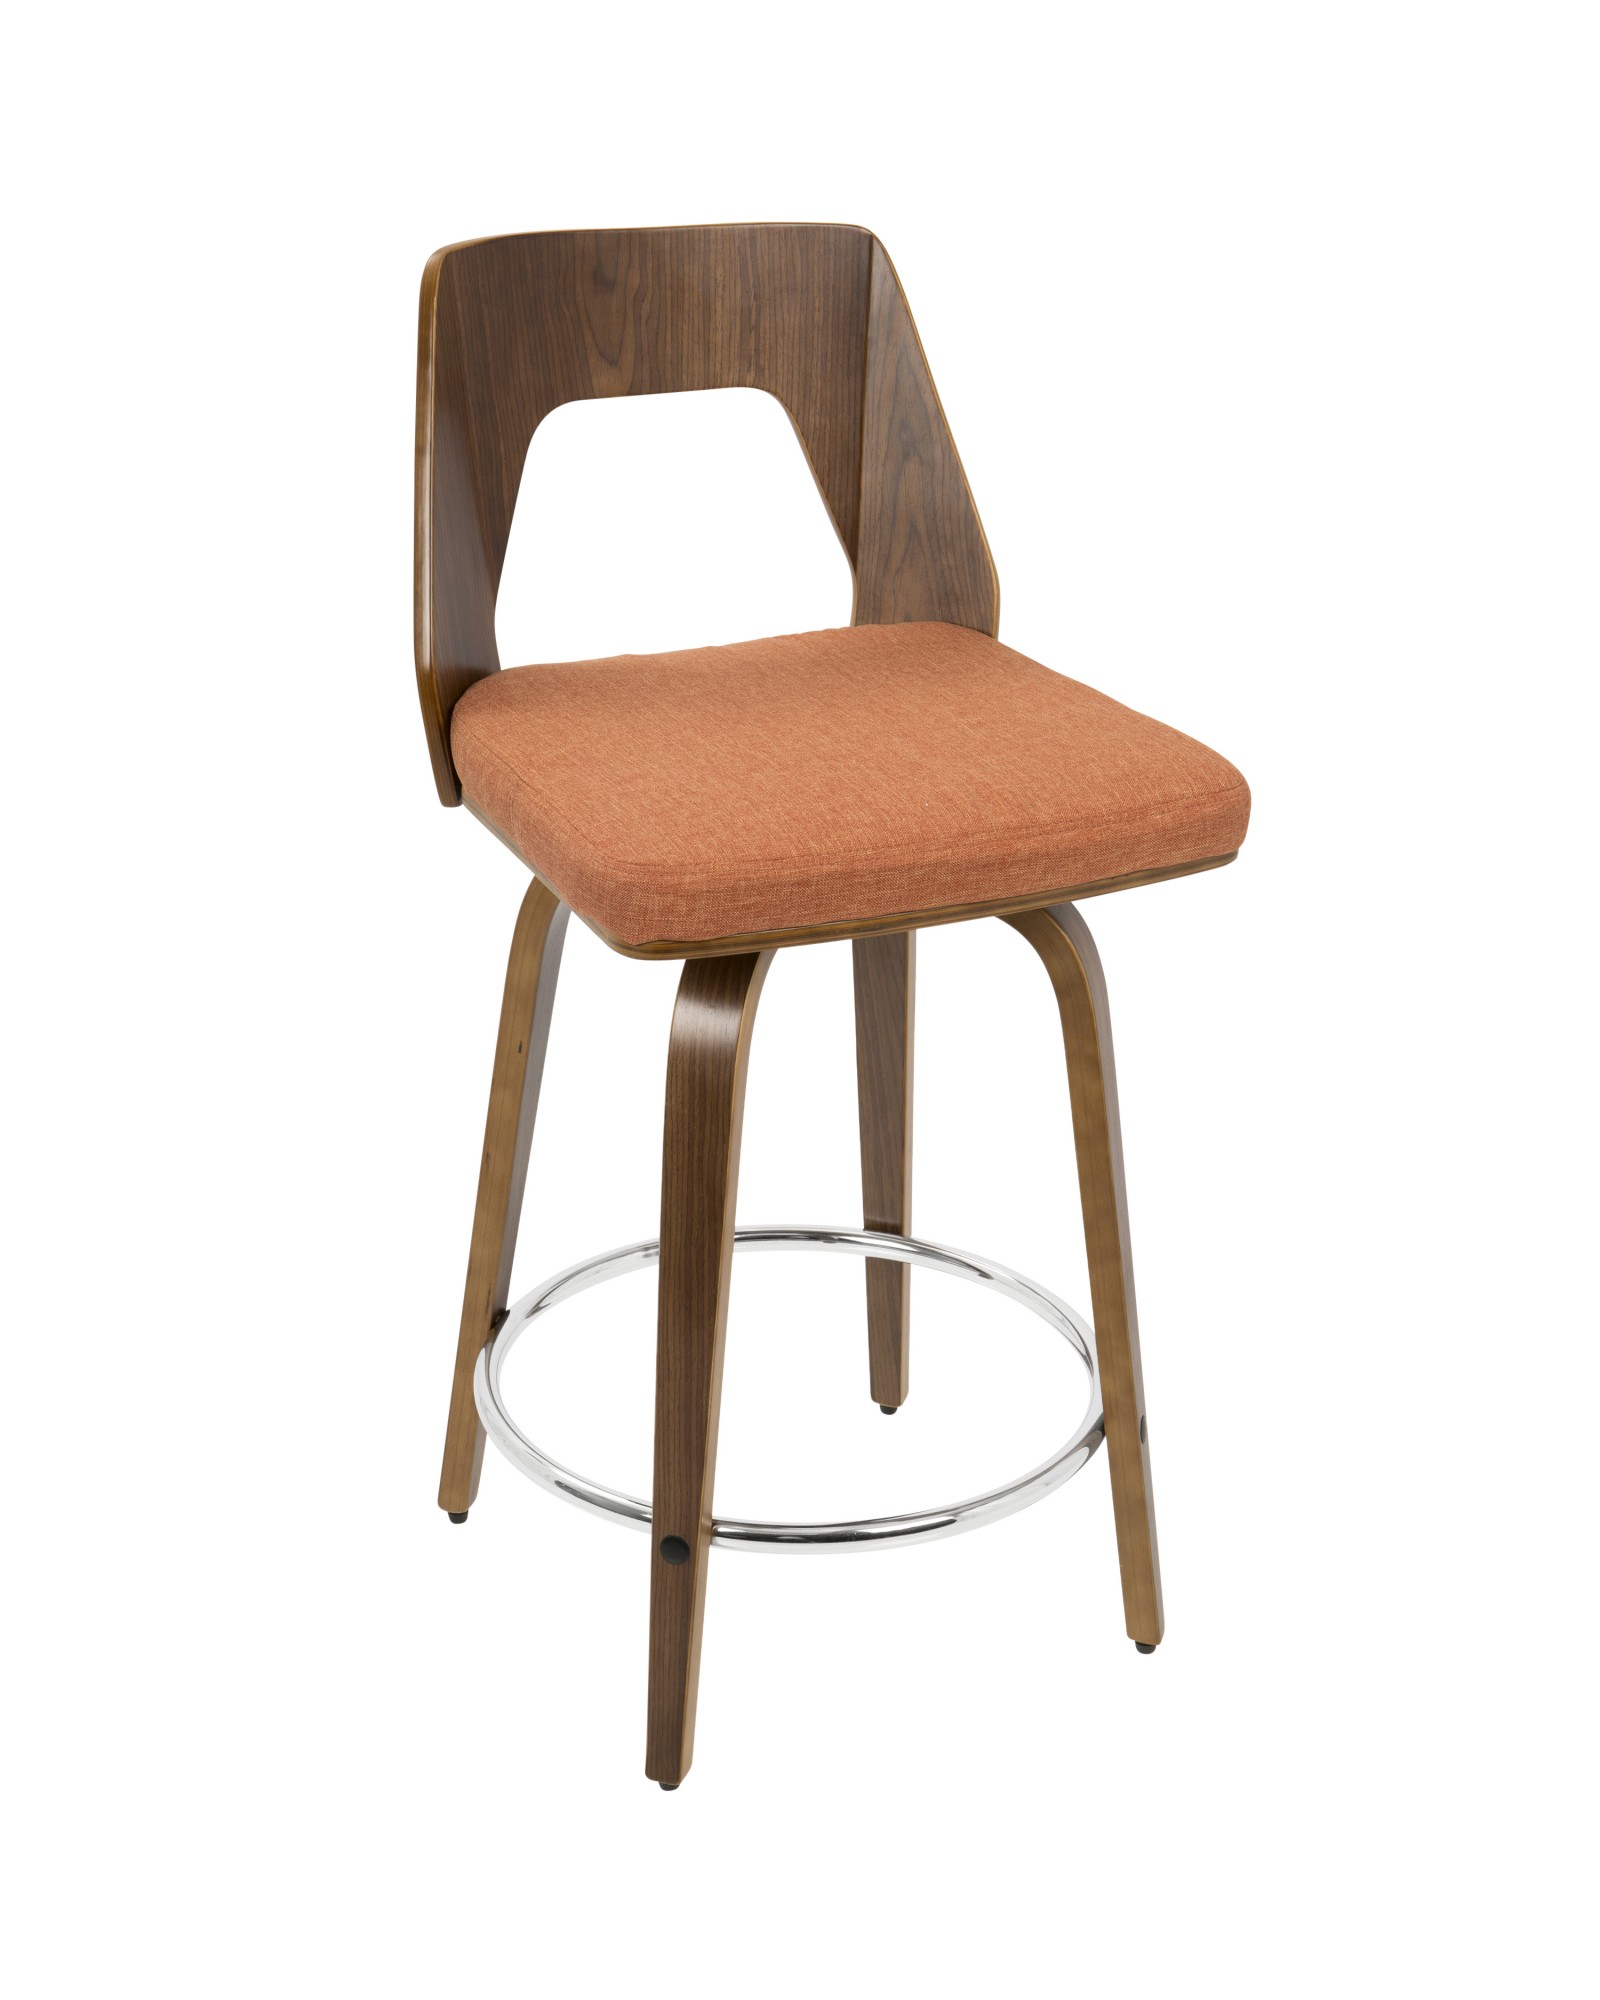 Trilogy Mid-Century Modern Counter Stool in Walnut and Orange Fabric